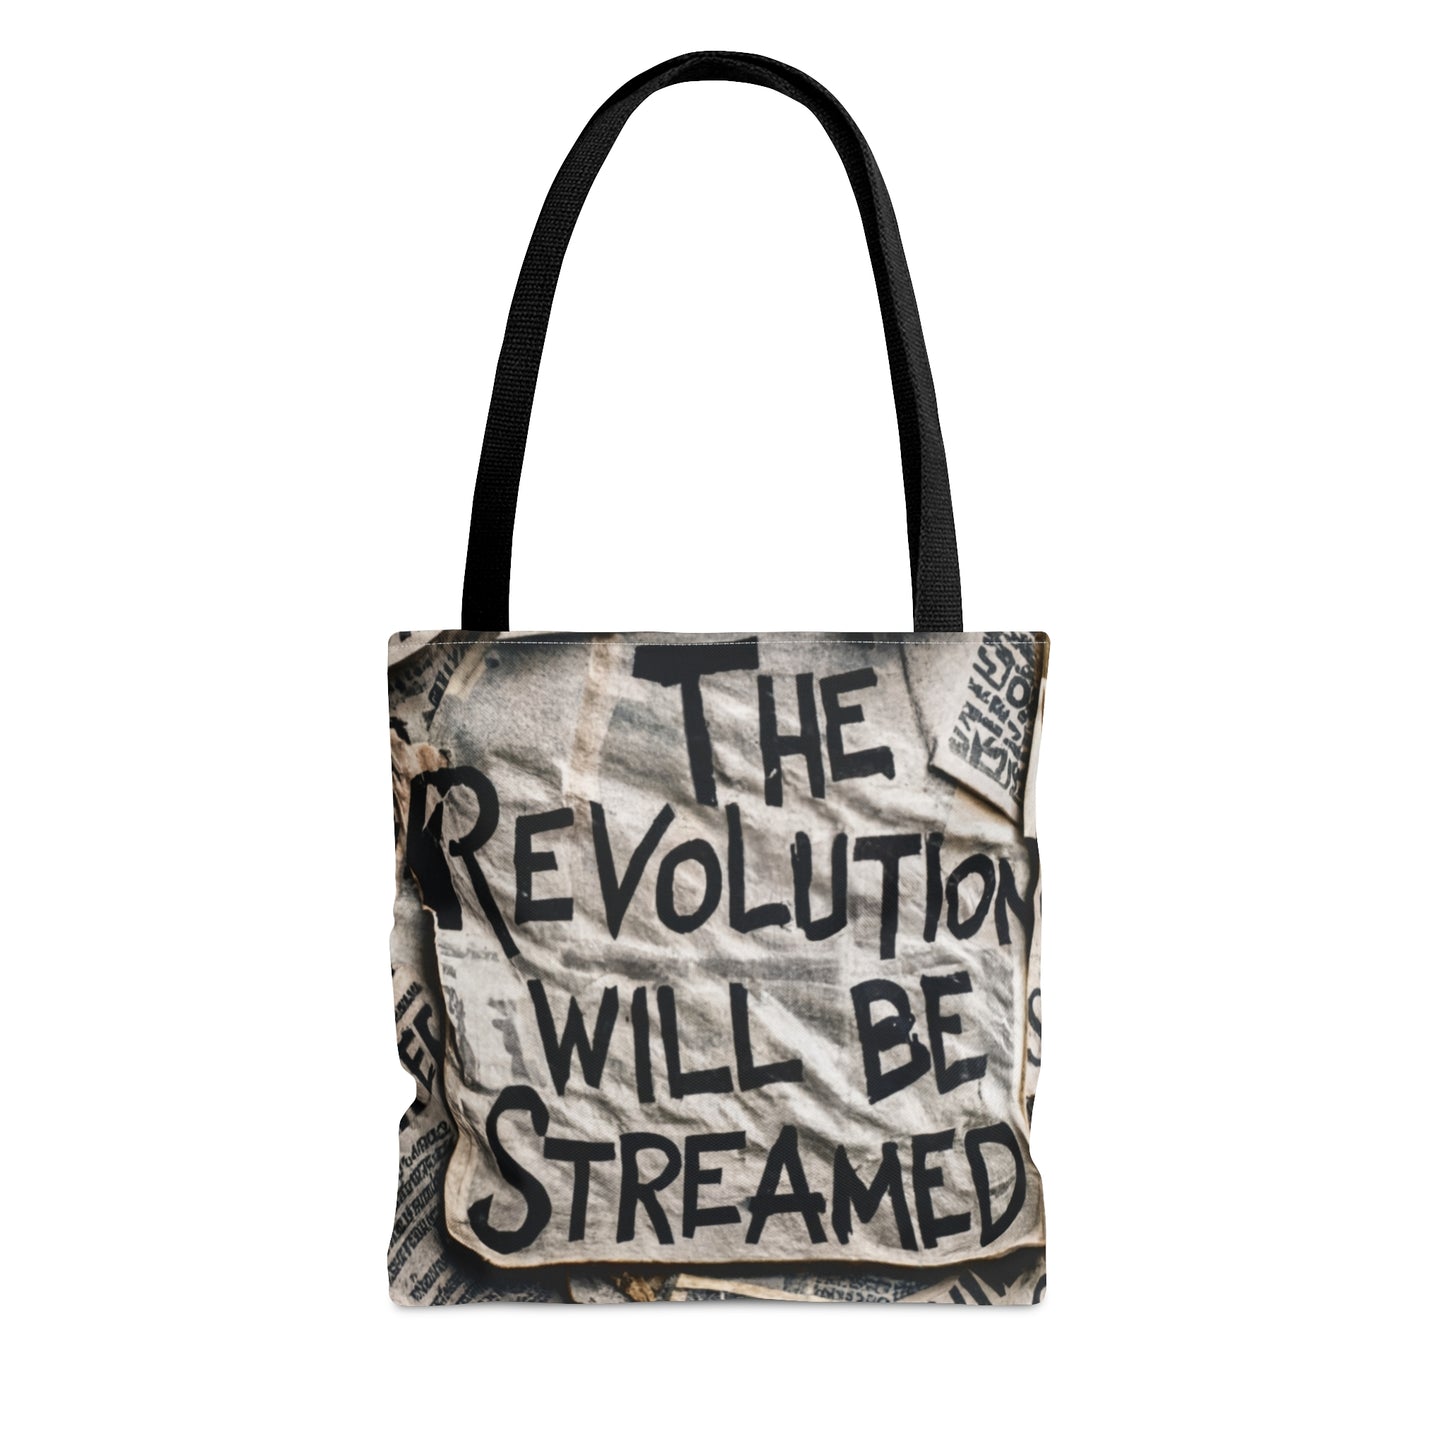 The Revolution will be Streamed" -- Tote Bag